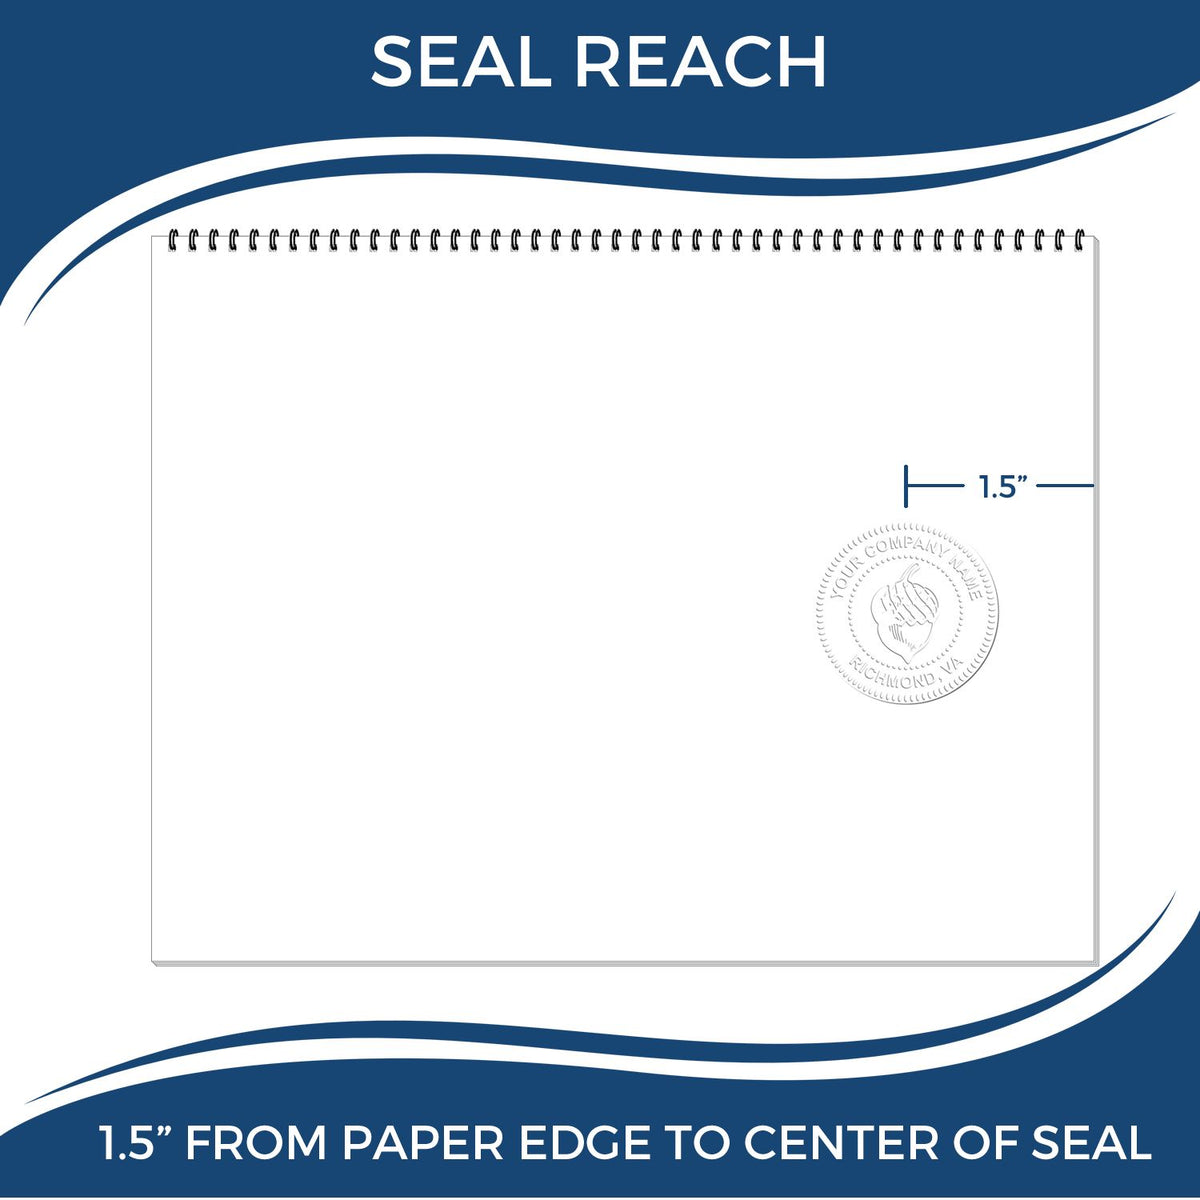 An infographic showing the seal reach which is represented by a ruler and a miniature seal image of the Gift Michigan Landscape Architect Seal